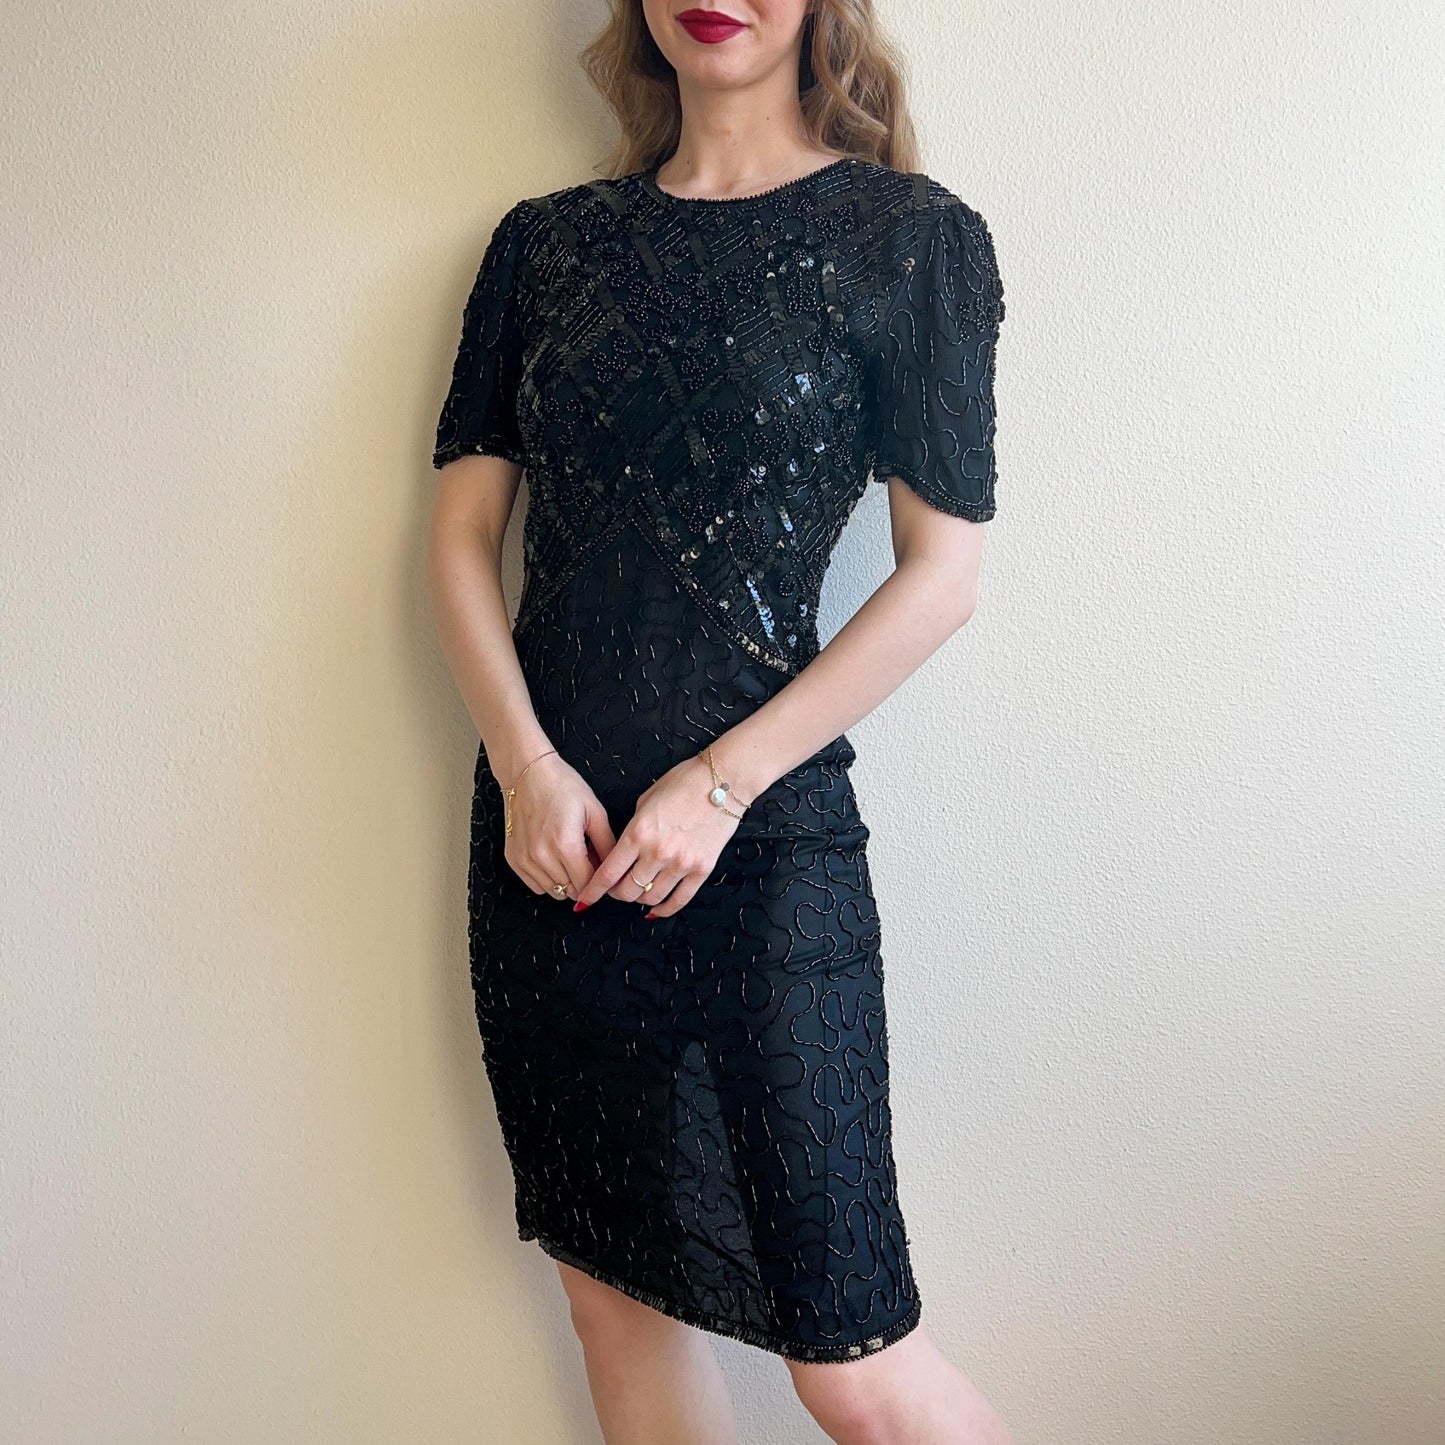 1980s Black Sequined Dress With Cut Out (XS/S)